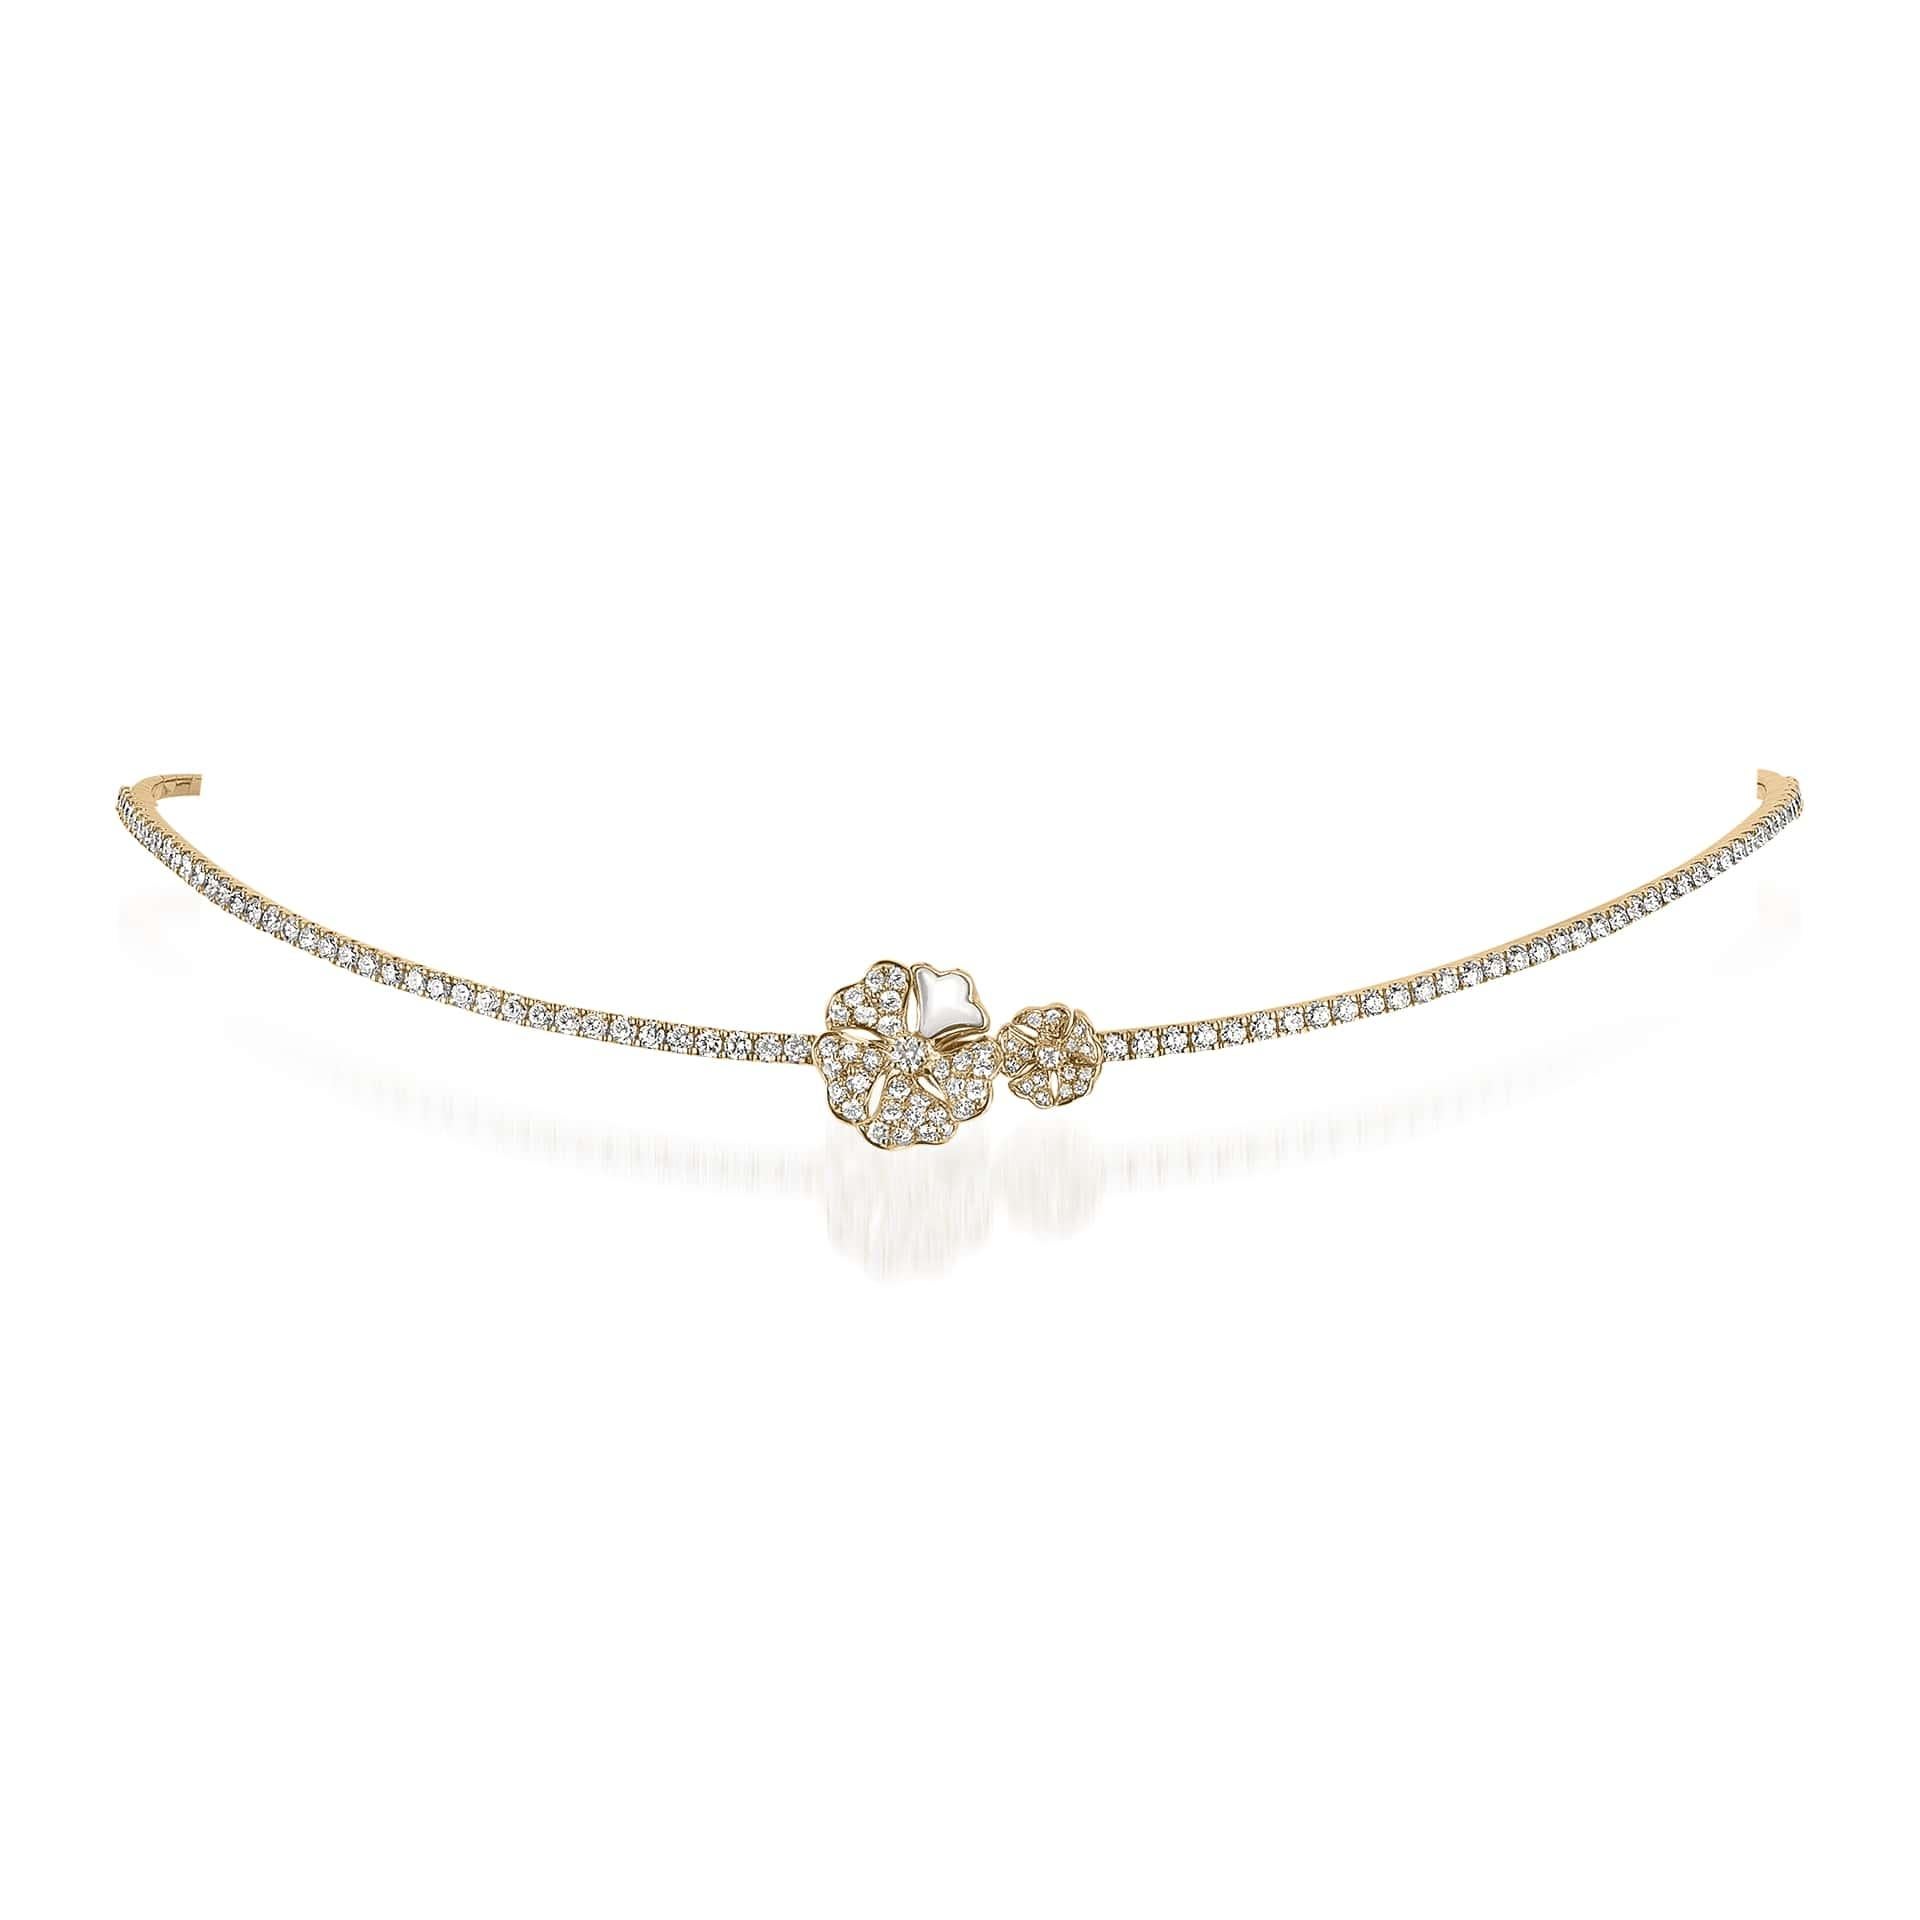 Bloom Pavé Diamond Flower Duo Choker with Mother-of-Pearl in 18K Yellow Gold

Inspired by the exquisite petals of the alpine cinquefoil flower, the Bloom collection combines the richness of diamonds and precious metals with the light versatility of